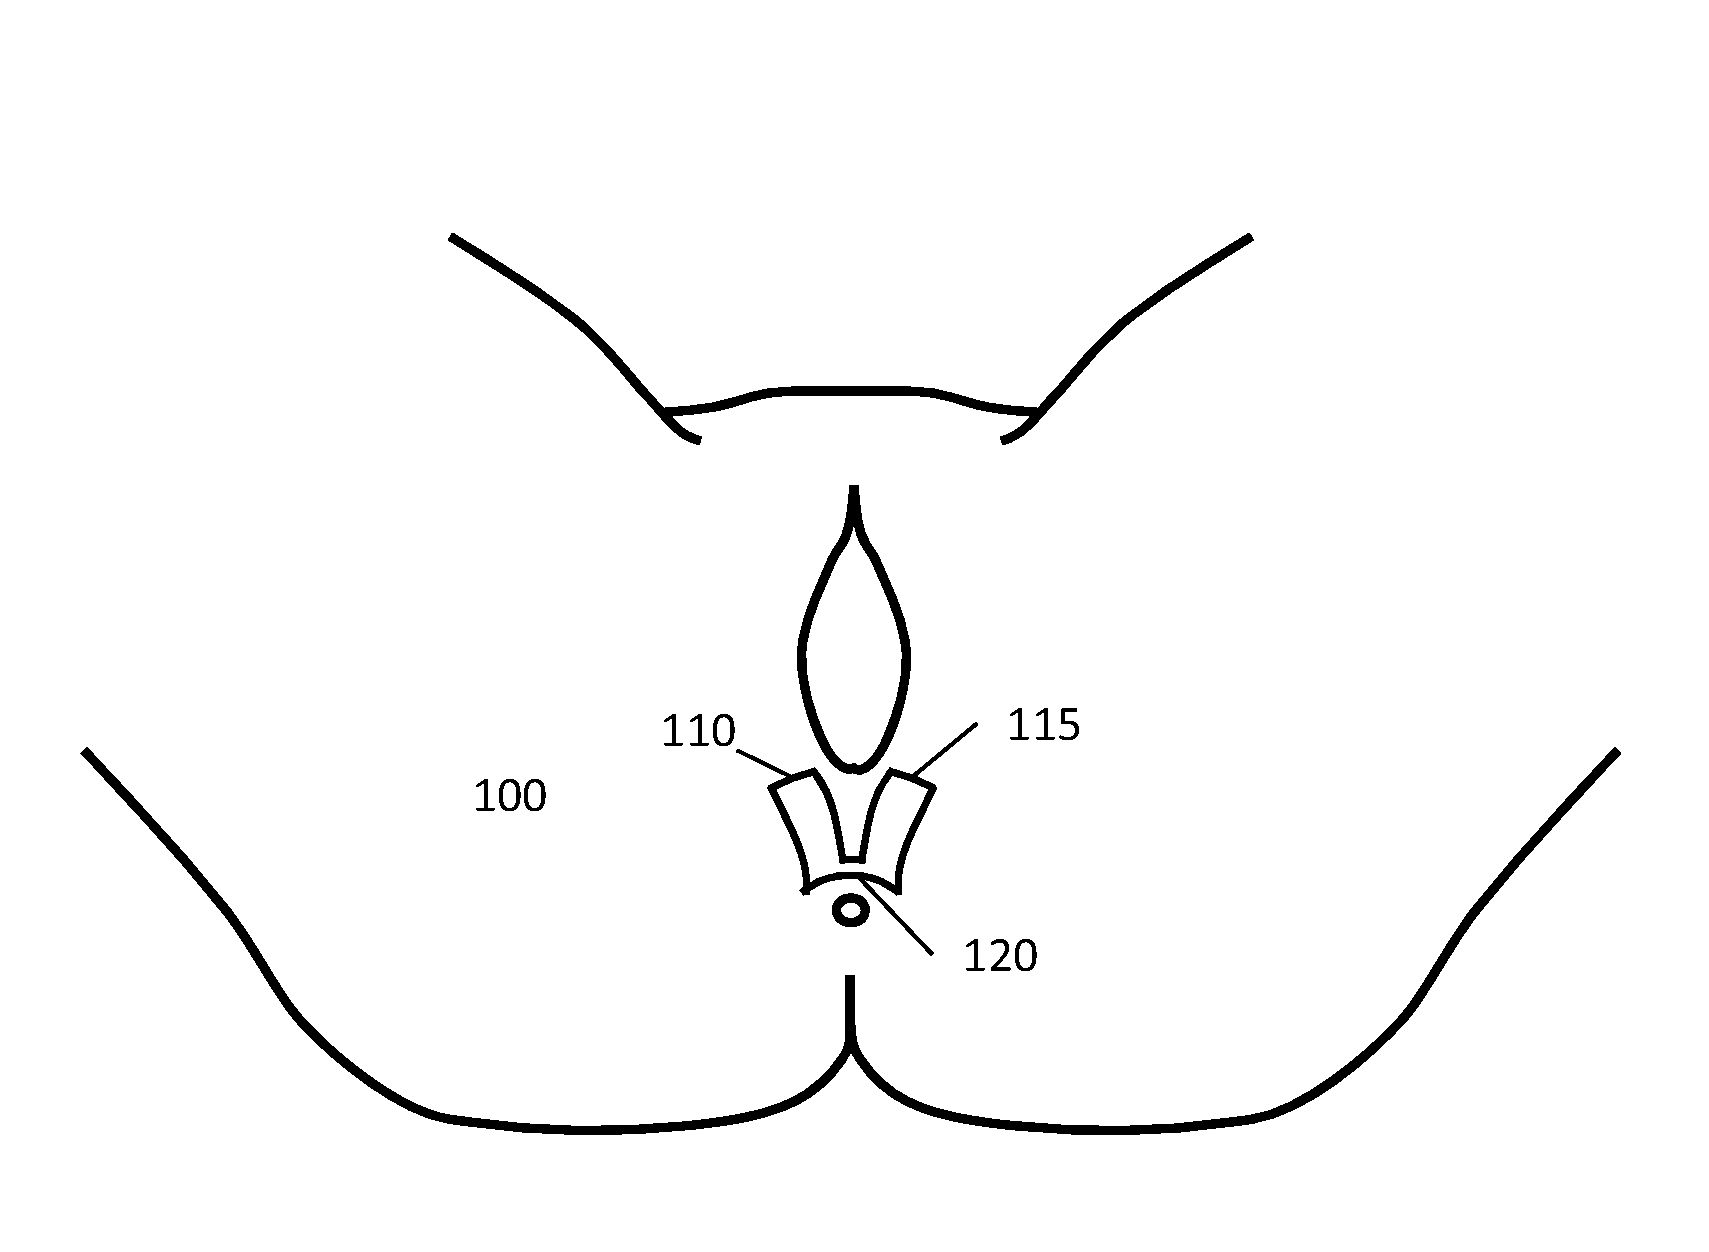 Device and Methods to Reduce Vaginal Tearing During Delivery